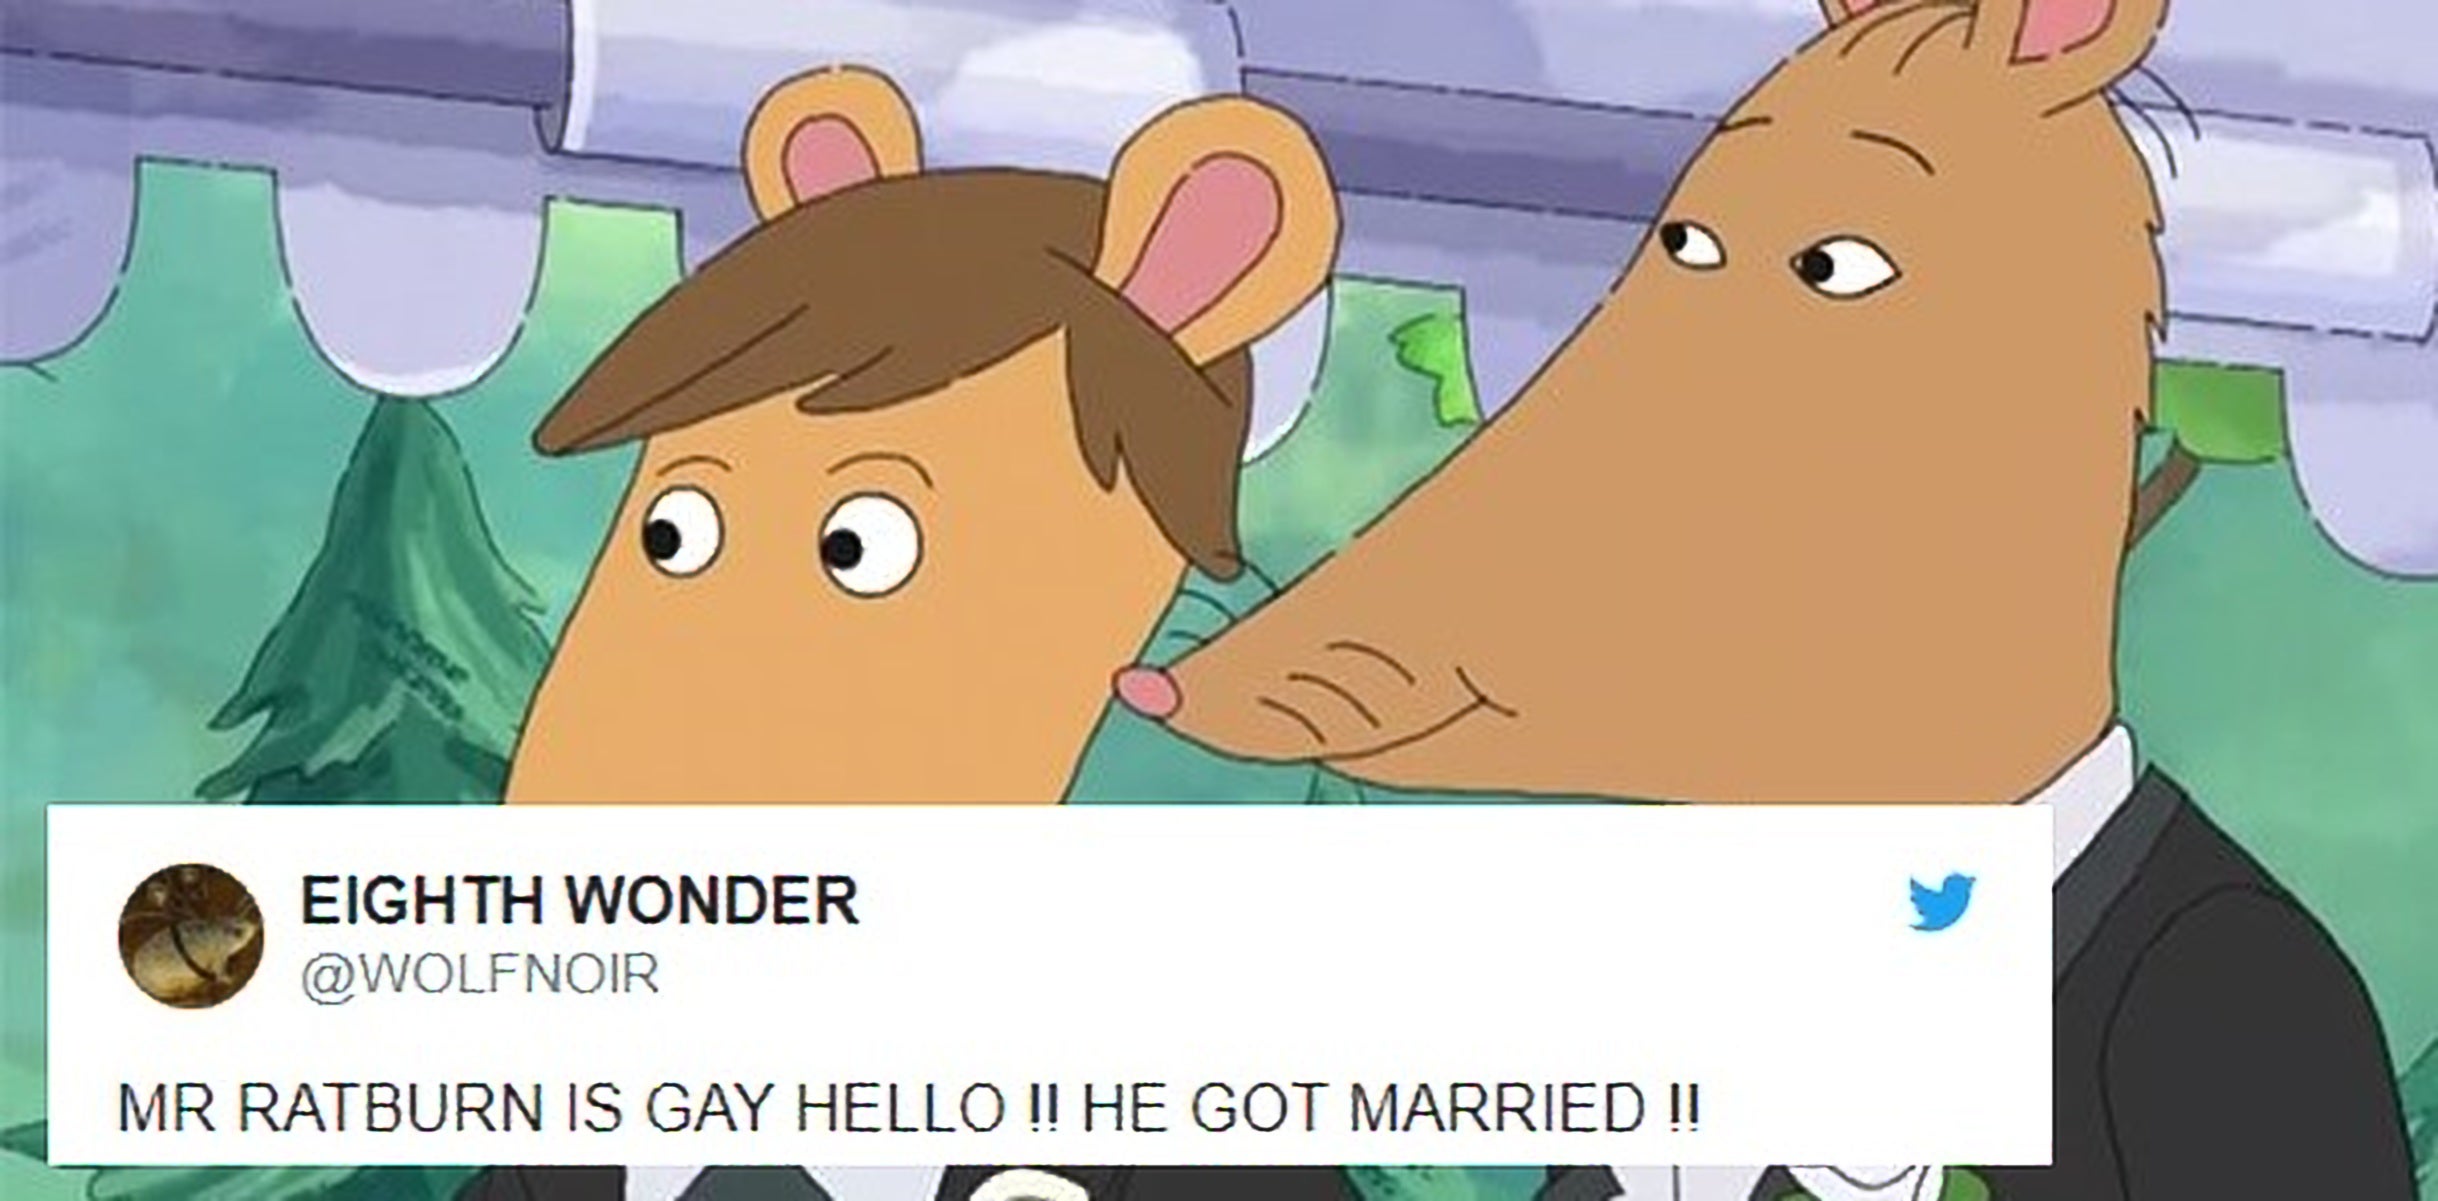 Arthur Character Mr Ratburn Comes Out As Gay And Gets Married In New Episode Indy100 Indy100